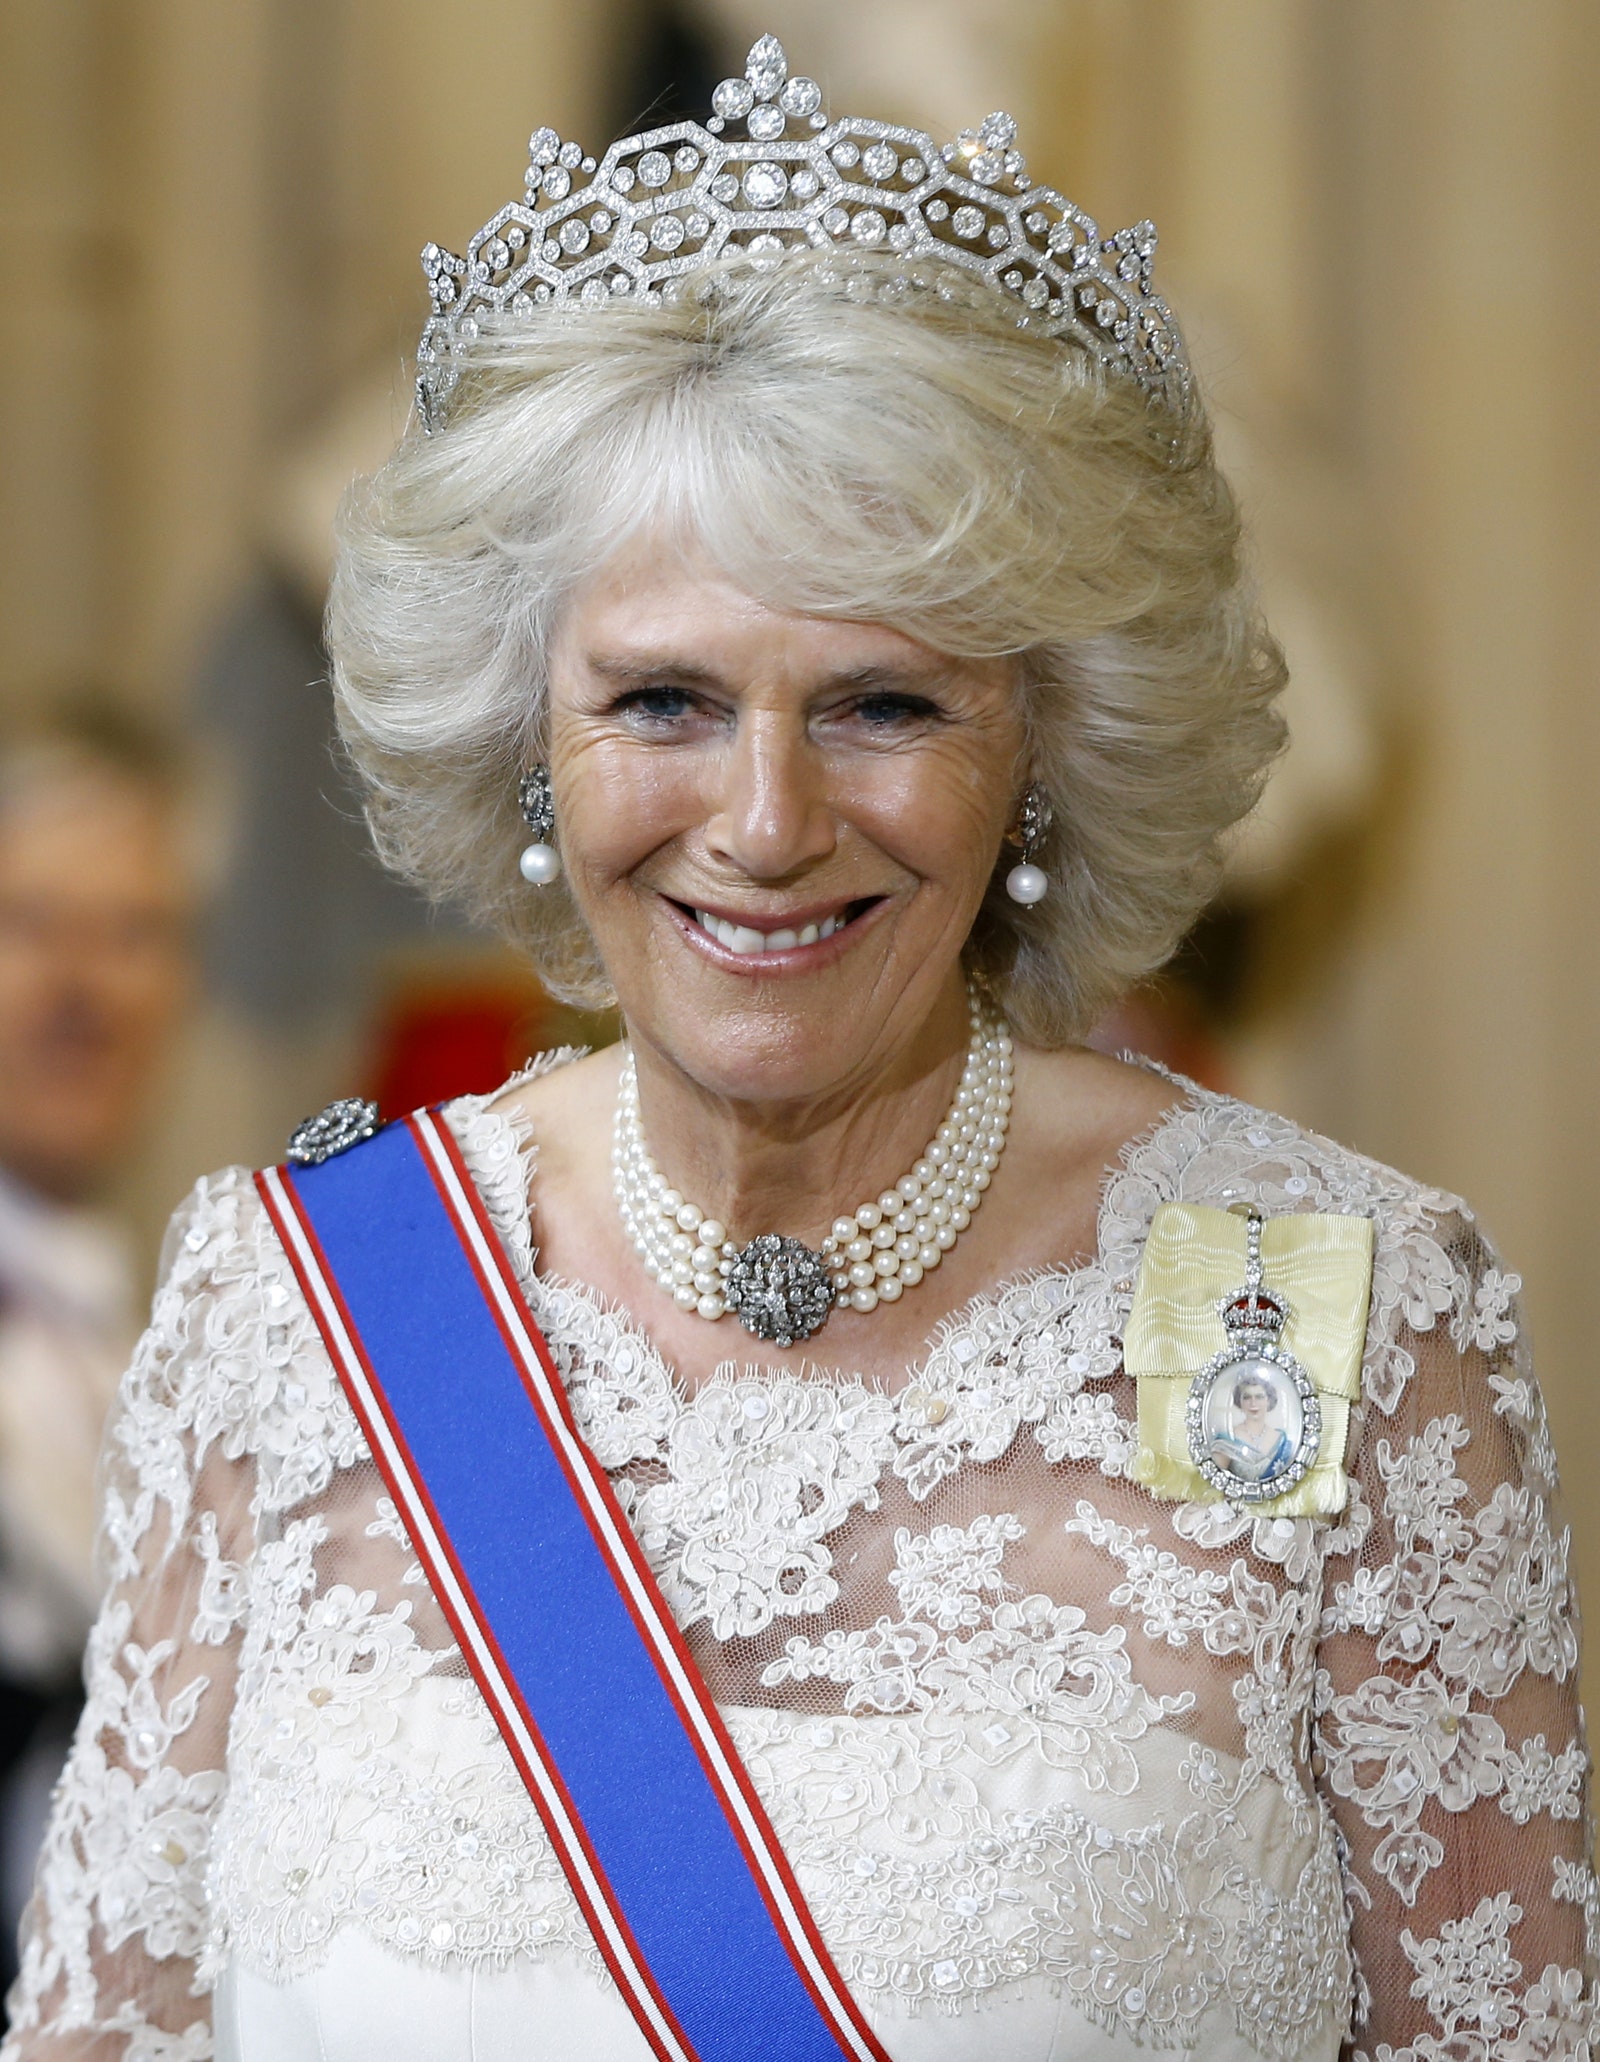 Inside Queen Camilla's tiara collection pictured the Greville Tiara worn to the State Opening of Parliament in 2013